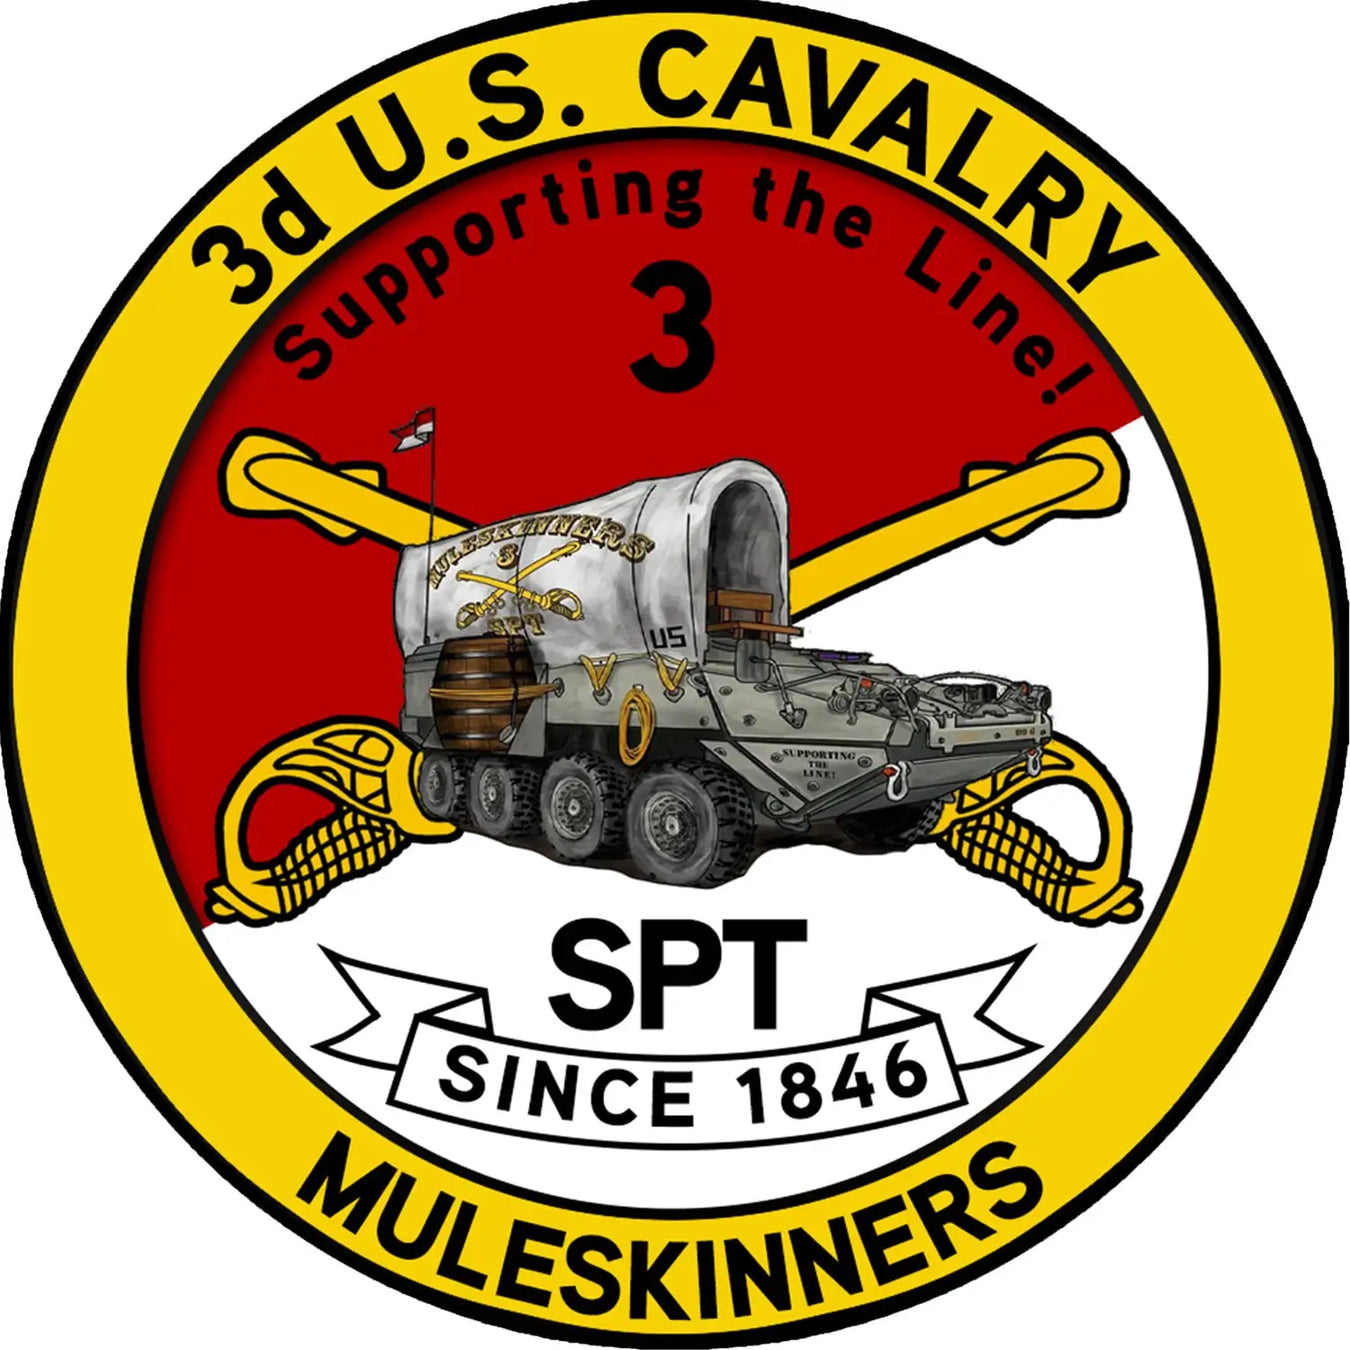 Support Squadron 3rd Cavalry Regiment "Muleskinners"